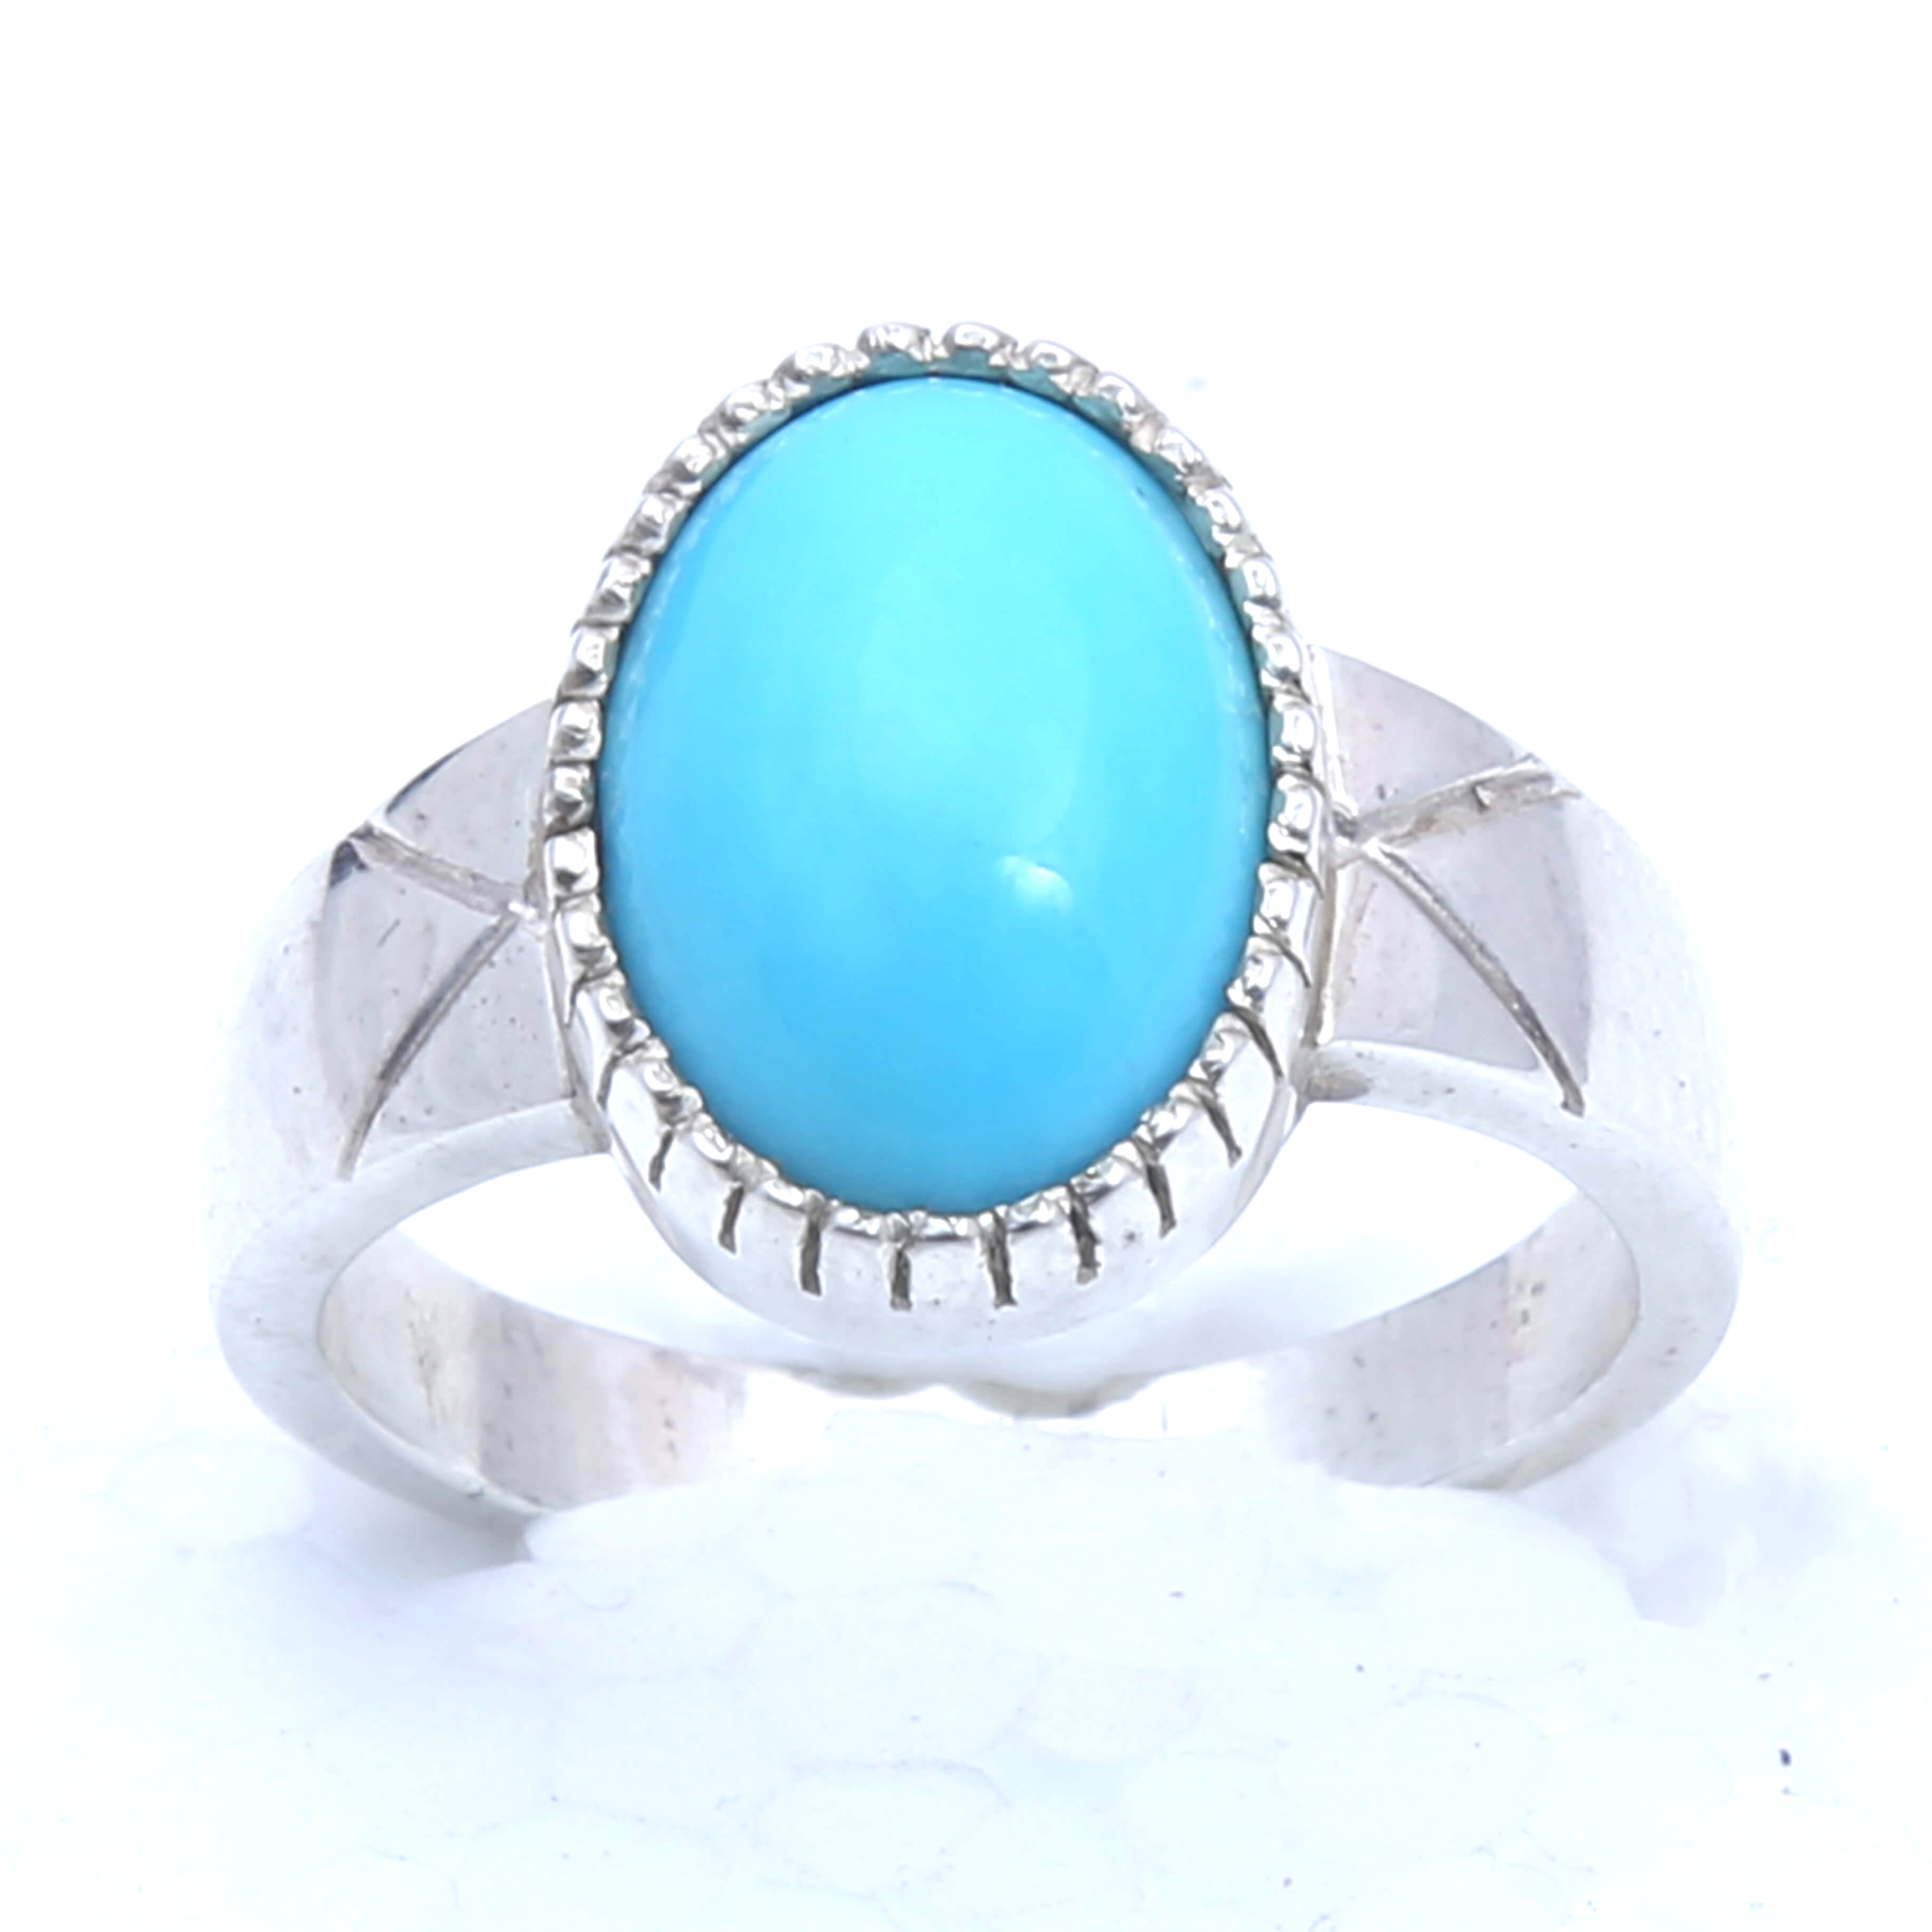 Buy 925 Sterling Silver Ring, Blue Copper Turquoise Gemstone Ring, Prong  Setting Ring, Cabochon Ring, Handmade Jewelry Online in India - Etsy | Turquoise  ring silver, Turquoise sterling silver, Sterling silver rings